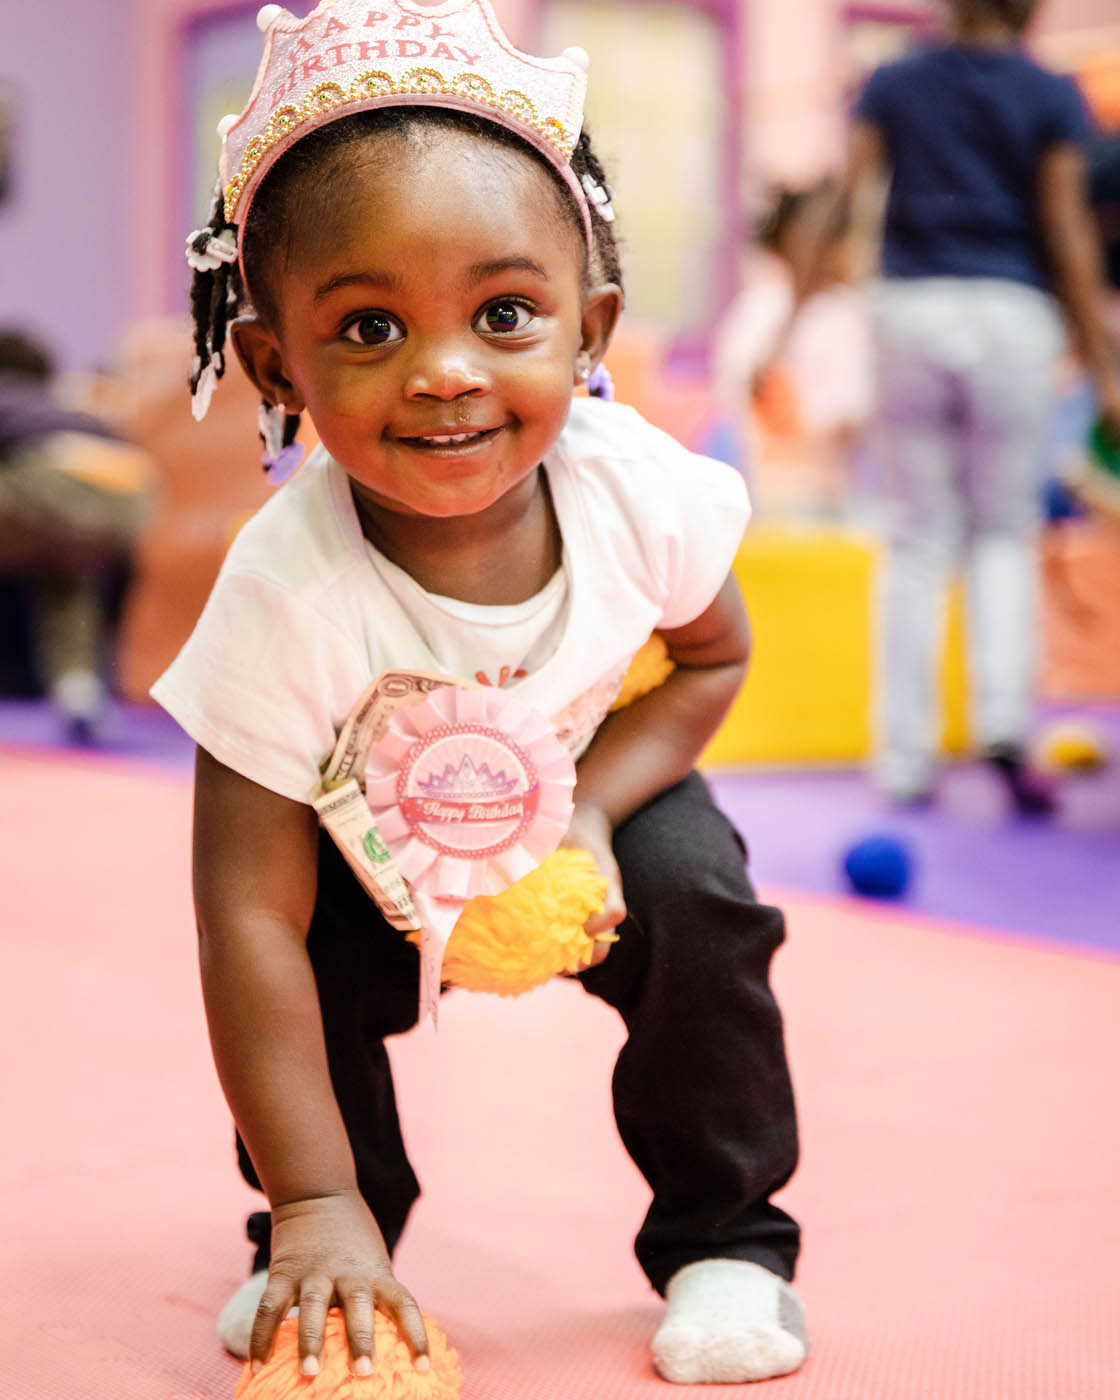 A toddler in a white shirt smiling at the camera, contact us today for toddler activities in Westbury.